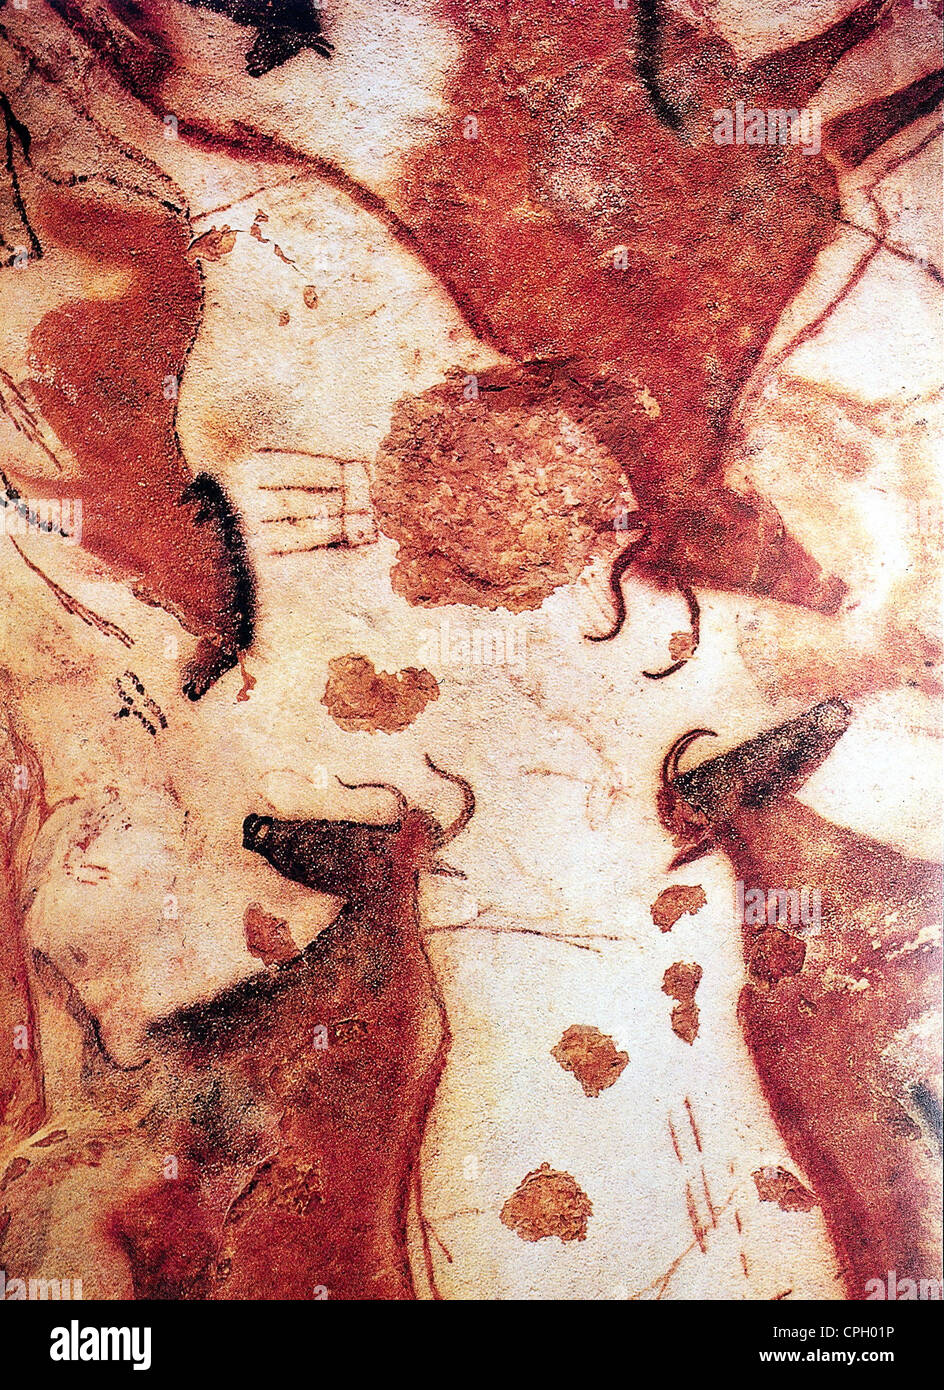 prehistory, cave-painting, Lascaux, reindeer, cows and wild horse, rock painting, detail, ochre, France, circa 14000 BC, ocher, yellow earth , spruce ochre , rud, rudd, rock paintings, wild horses, reindeer, historic, historical, prehistoric, fine arts, zoology, animals, Stone age, Paleolithic, Palaeolithic, old stone age, horse, painting, ancient world, Artist's Copyright has not to be cleared Stock Photo